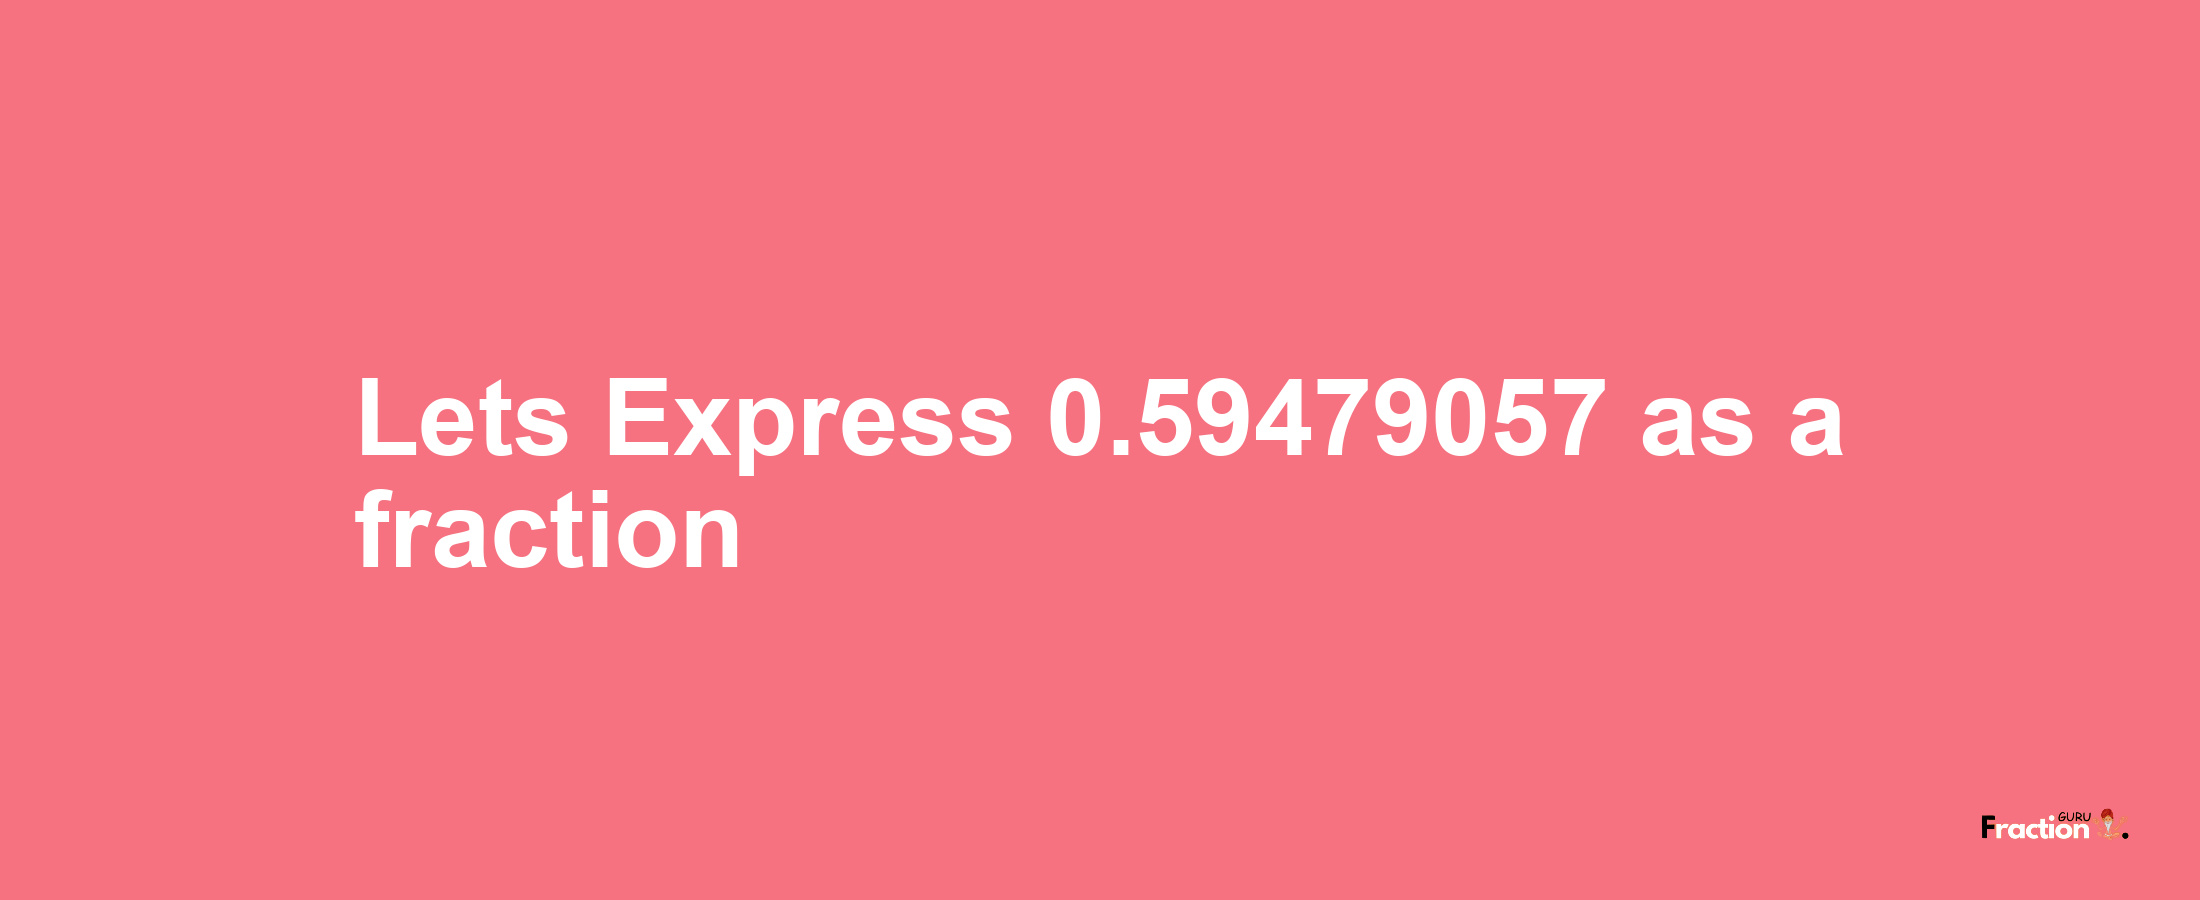 Lets Express 0.59479057 as afraction